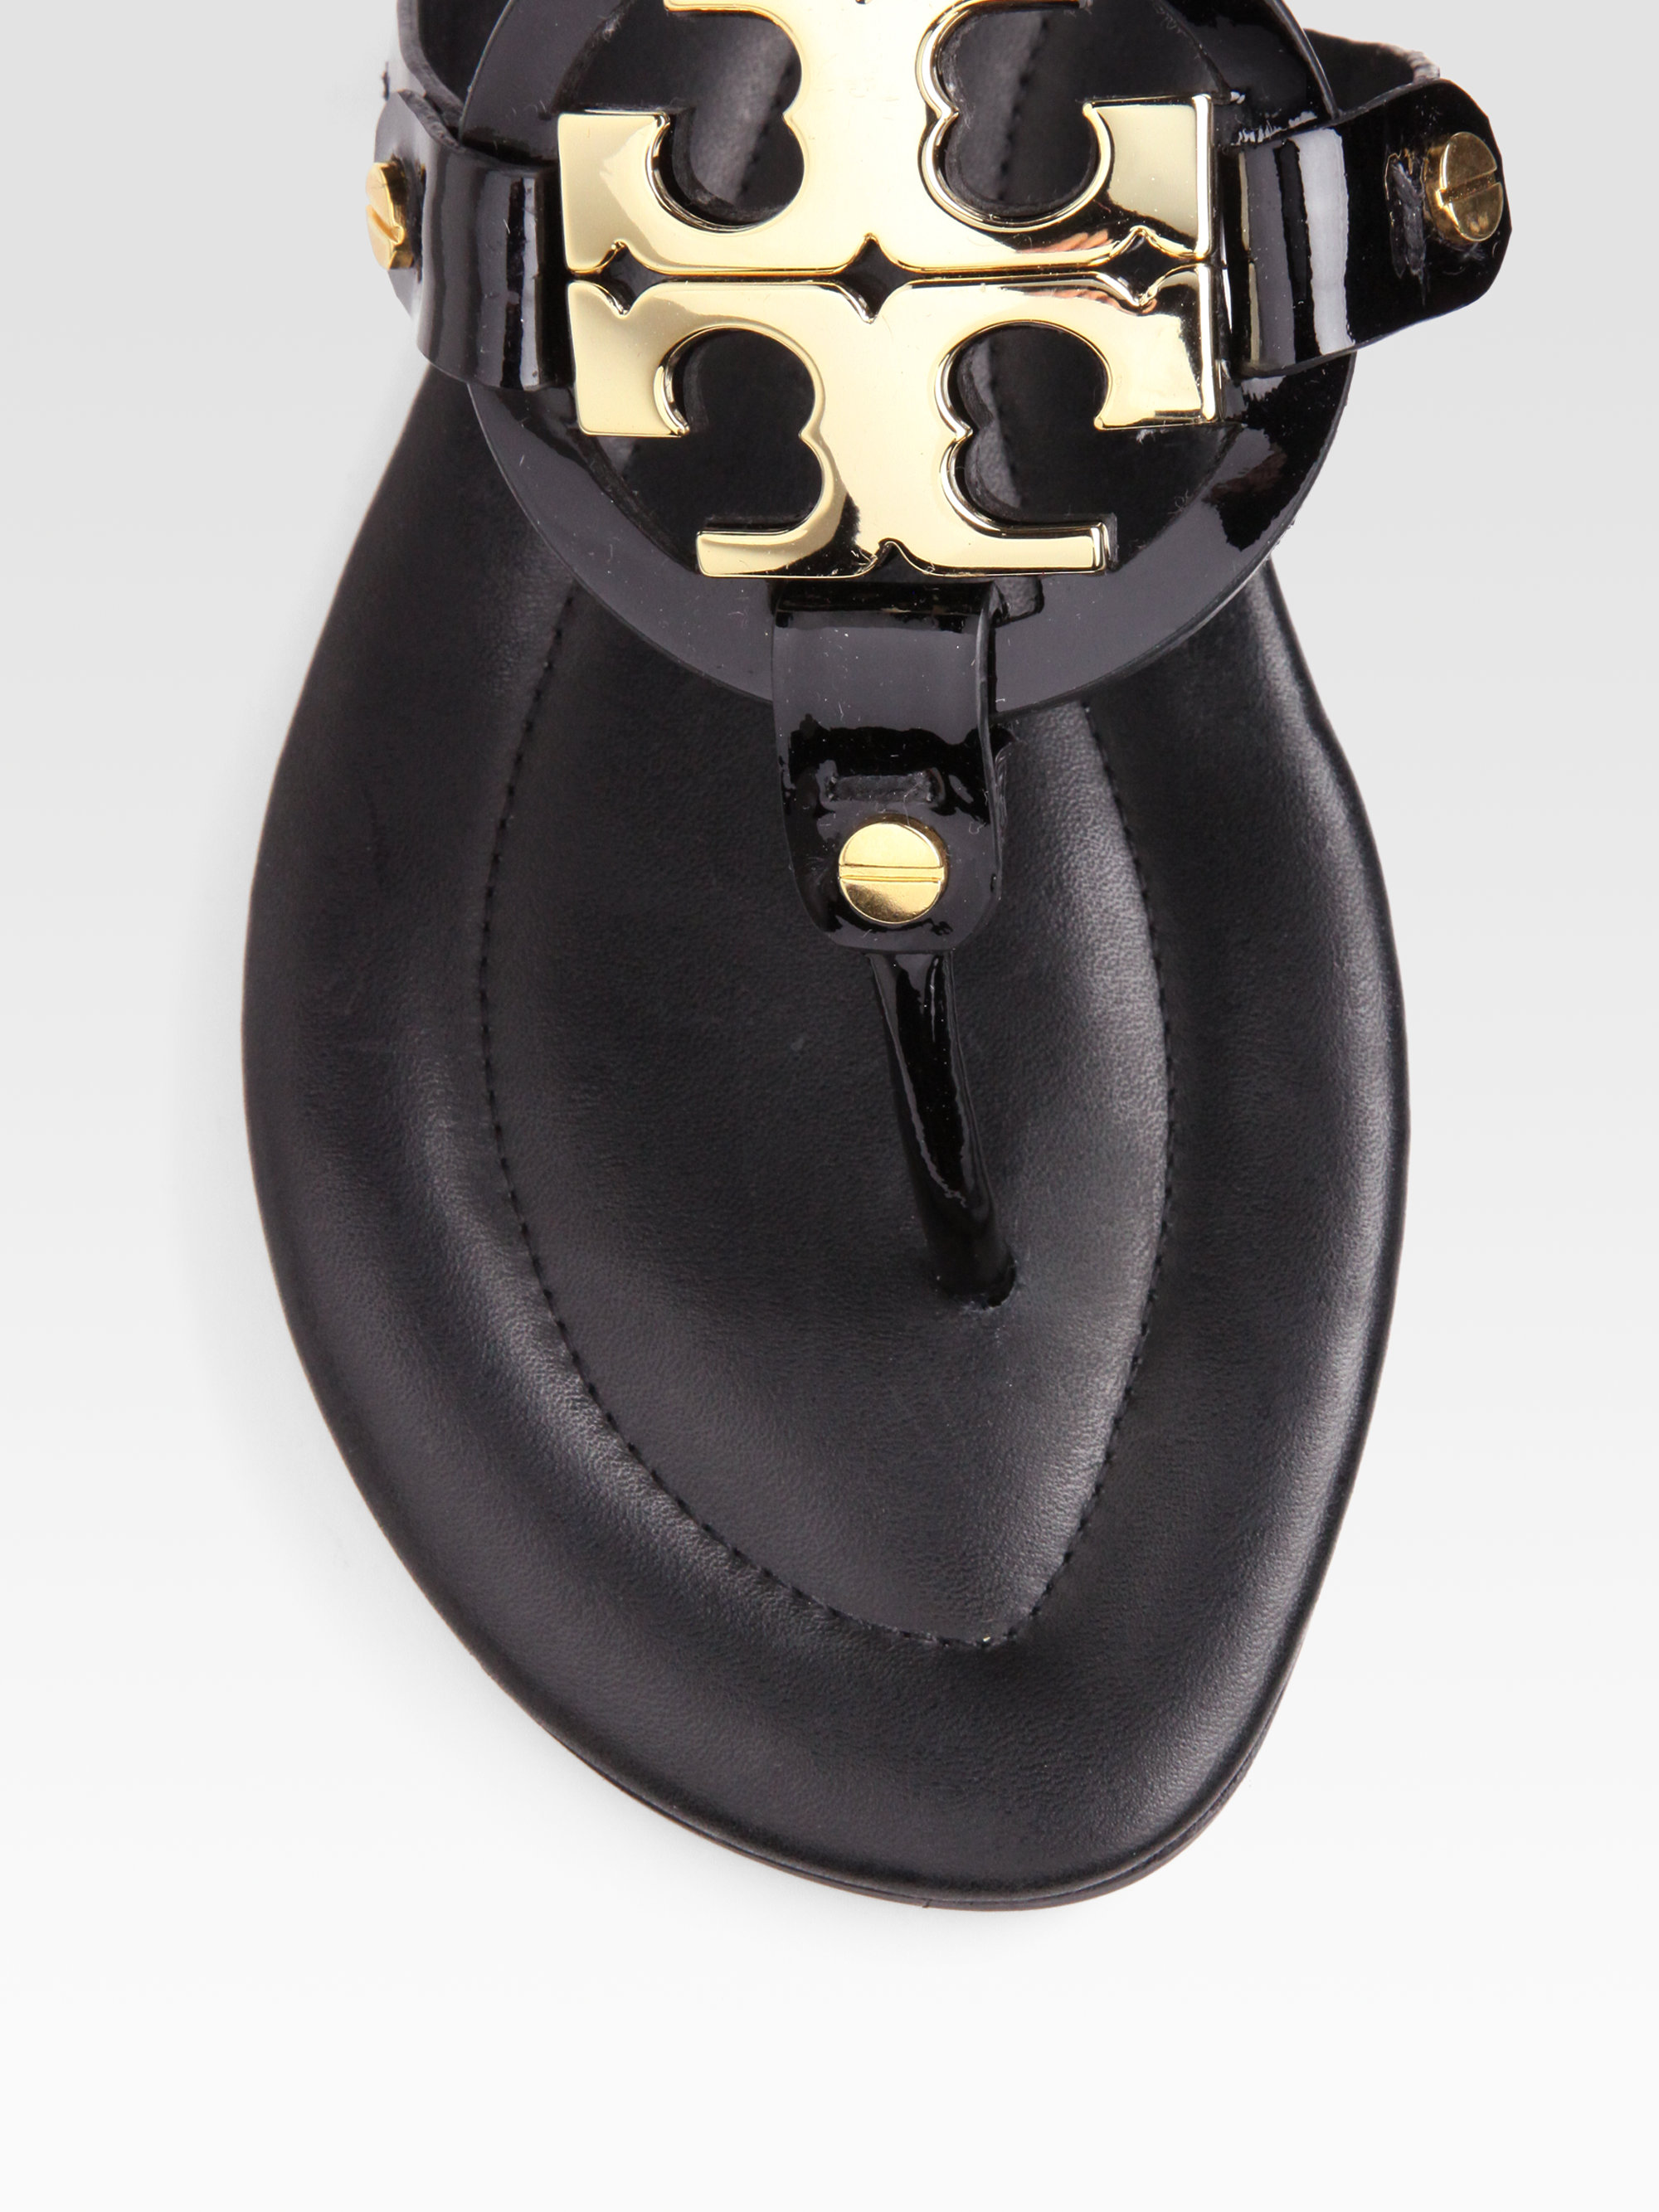 tory burch black and gold sandals